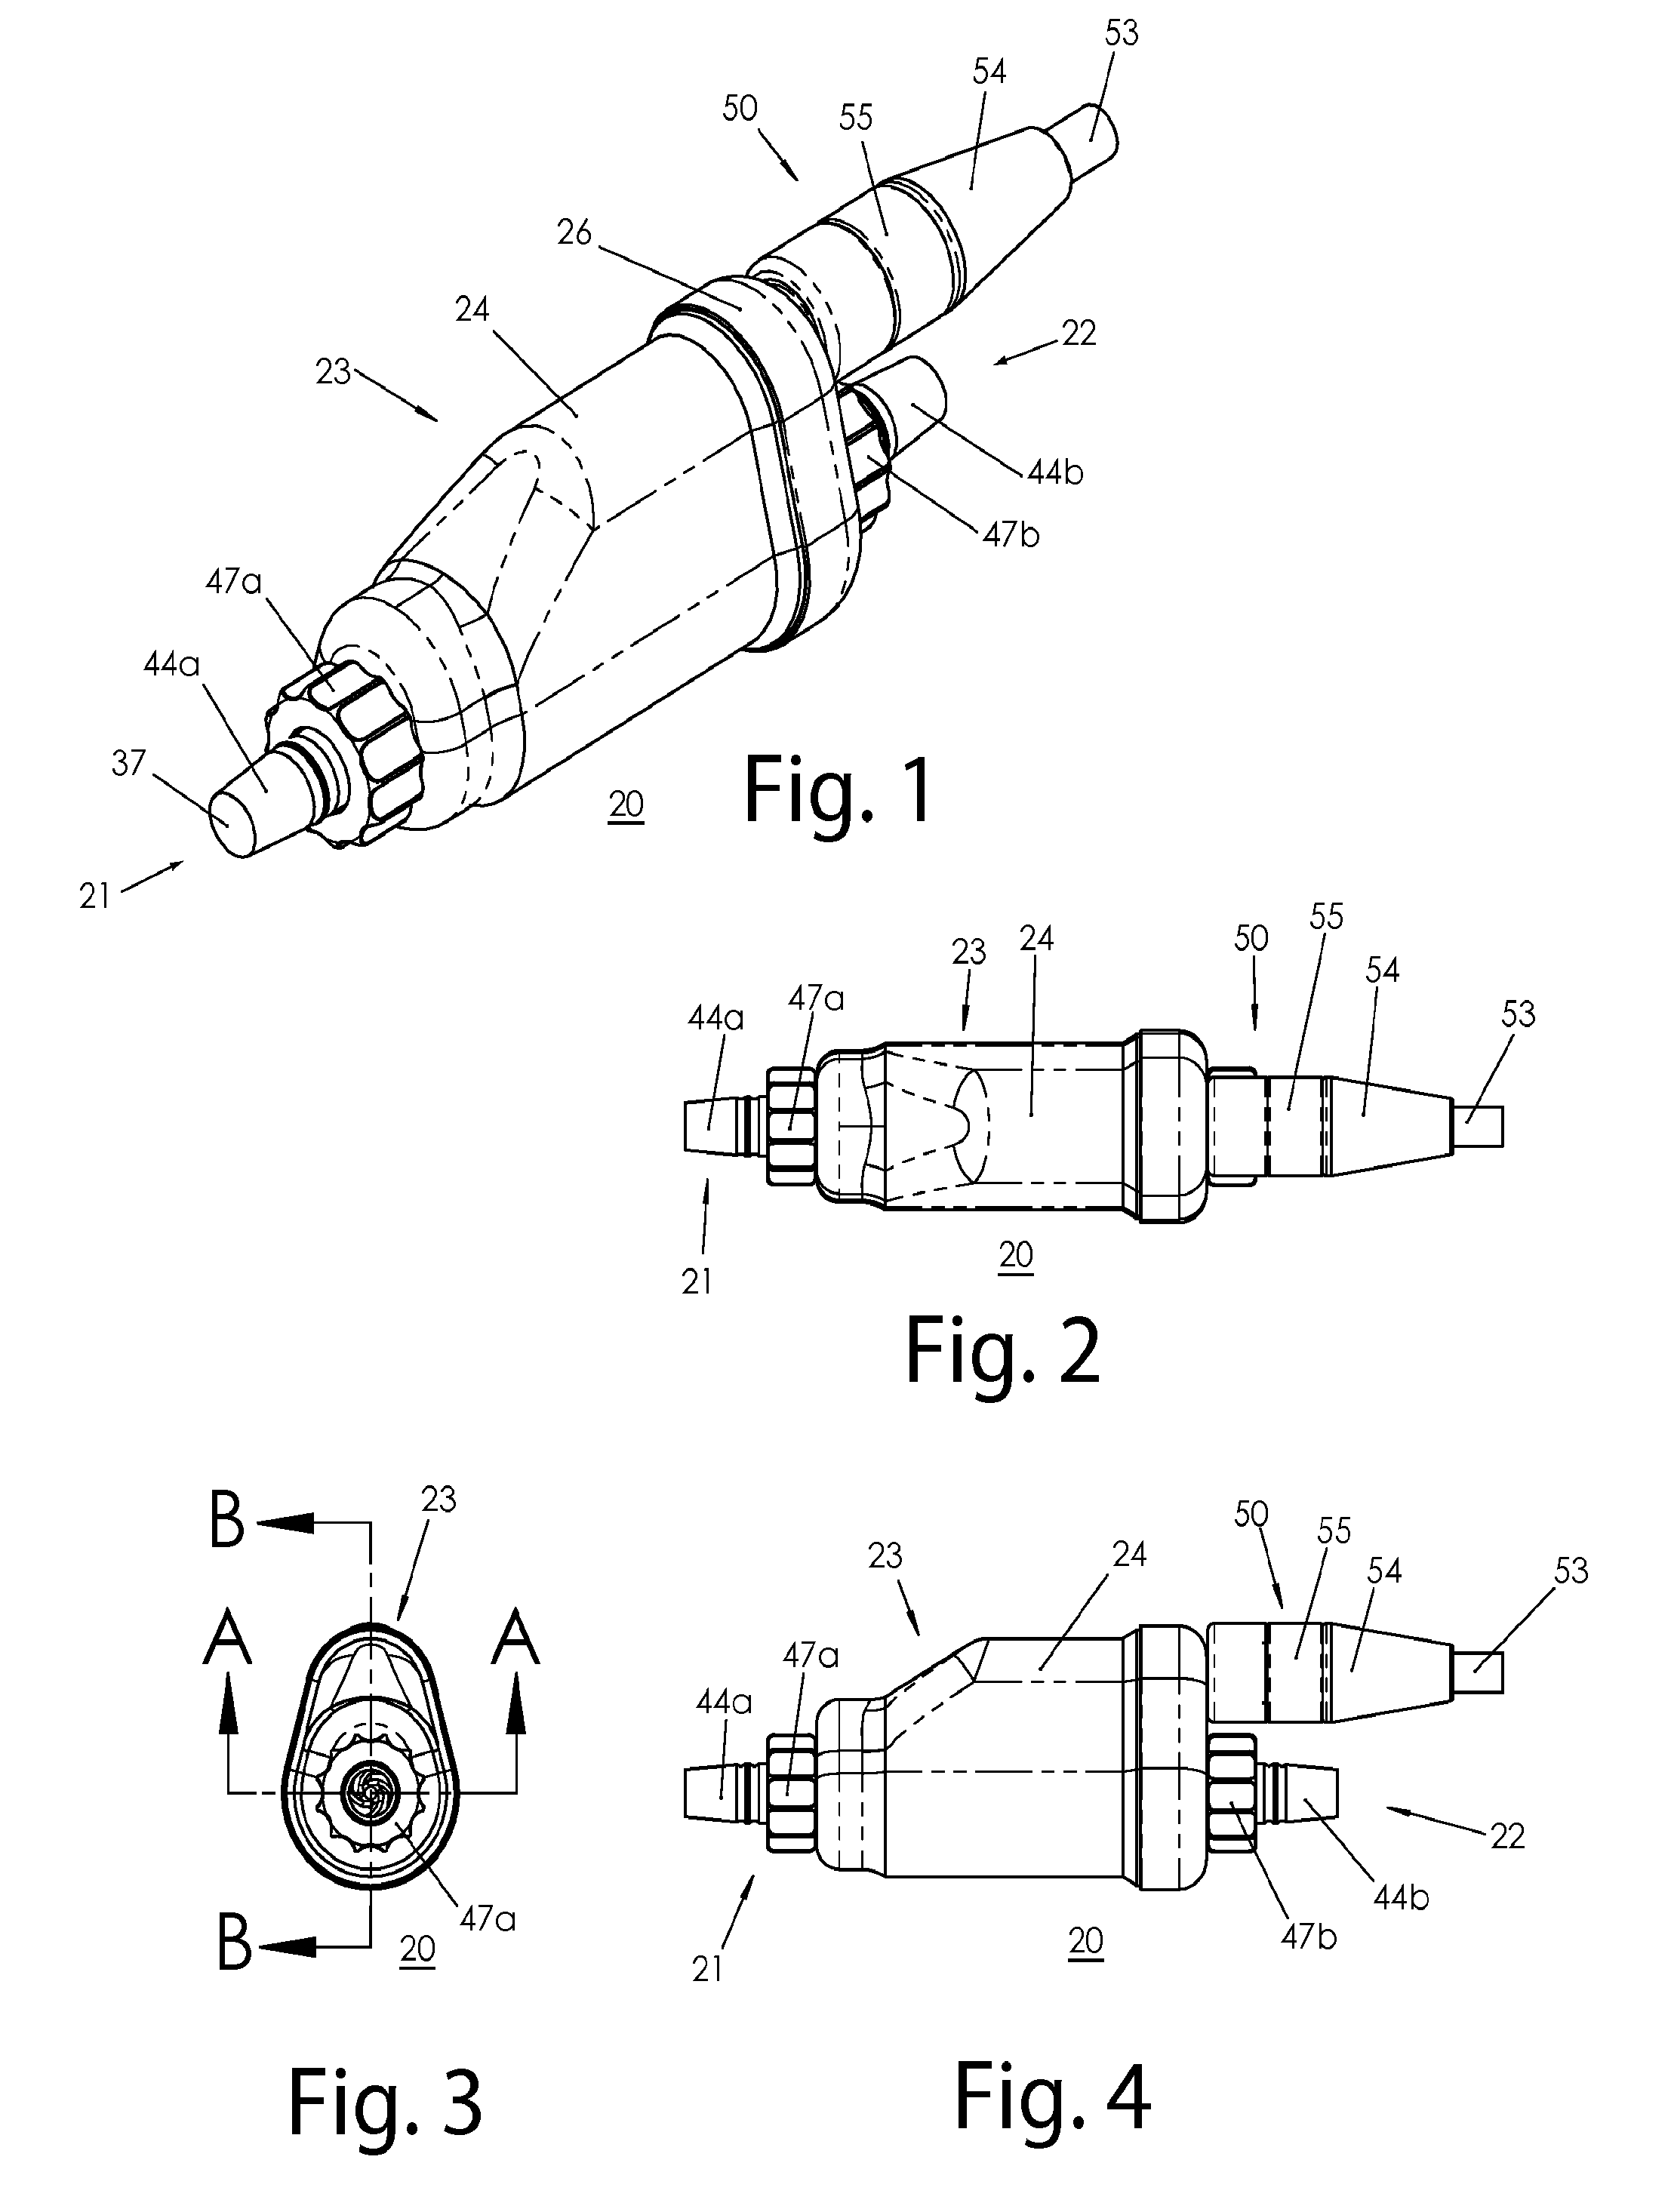 Magnetically-levitated blood pump with optimization method enabling miniaturization